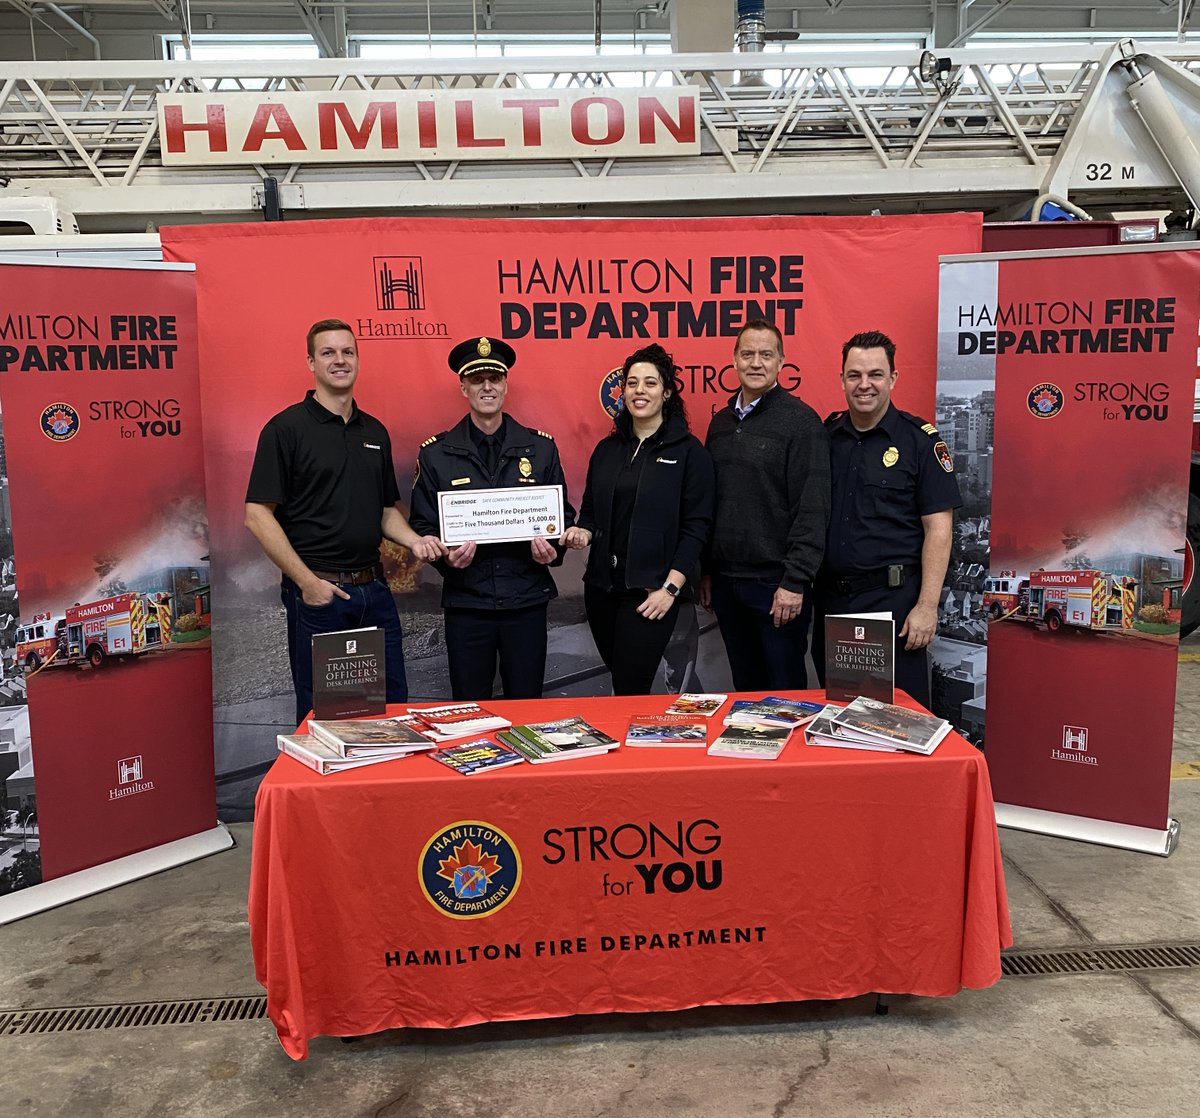 Big thank you @enbridgegas. Your Safe Community Project Assist program provides valuable training resources to Fire Departments across Ontario including Hamilton Fire Department. #ENBfuelingfutures #Strongforyou #Hamont